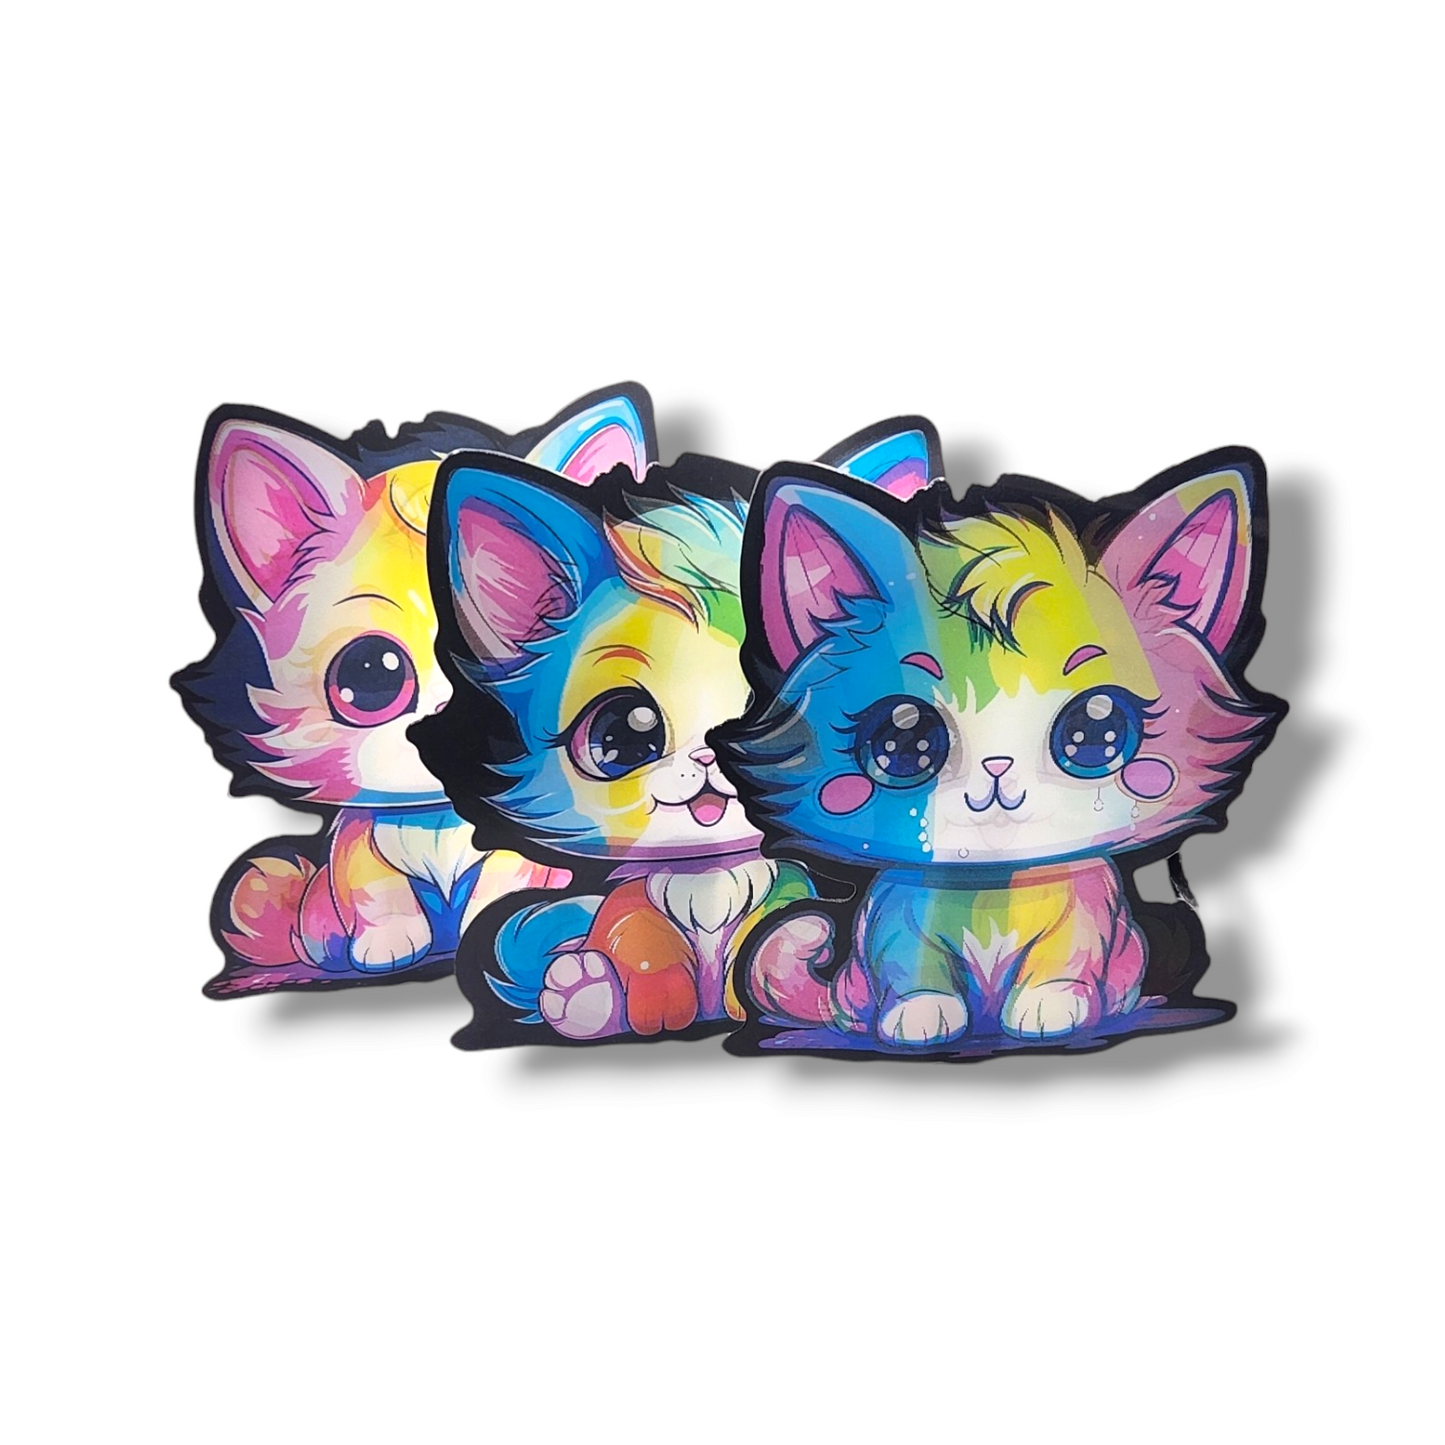 CUTE FAVOURITES 3D MOTION STICKERS